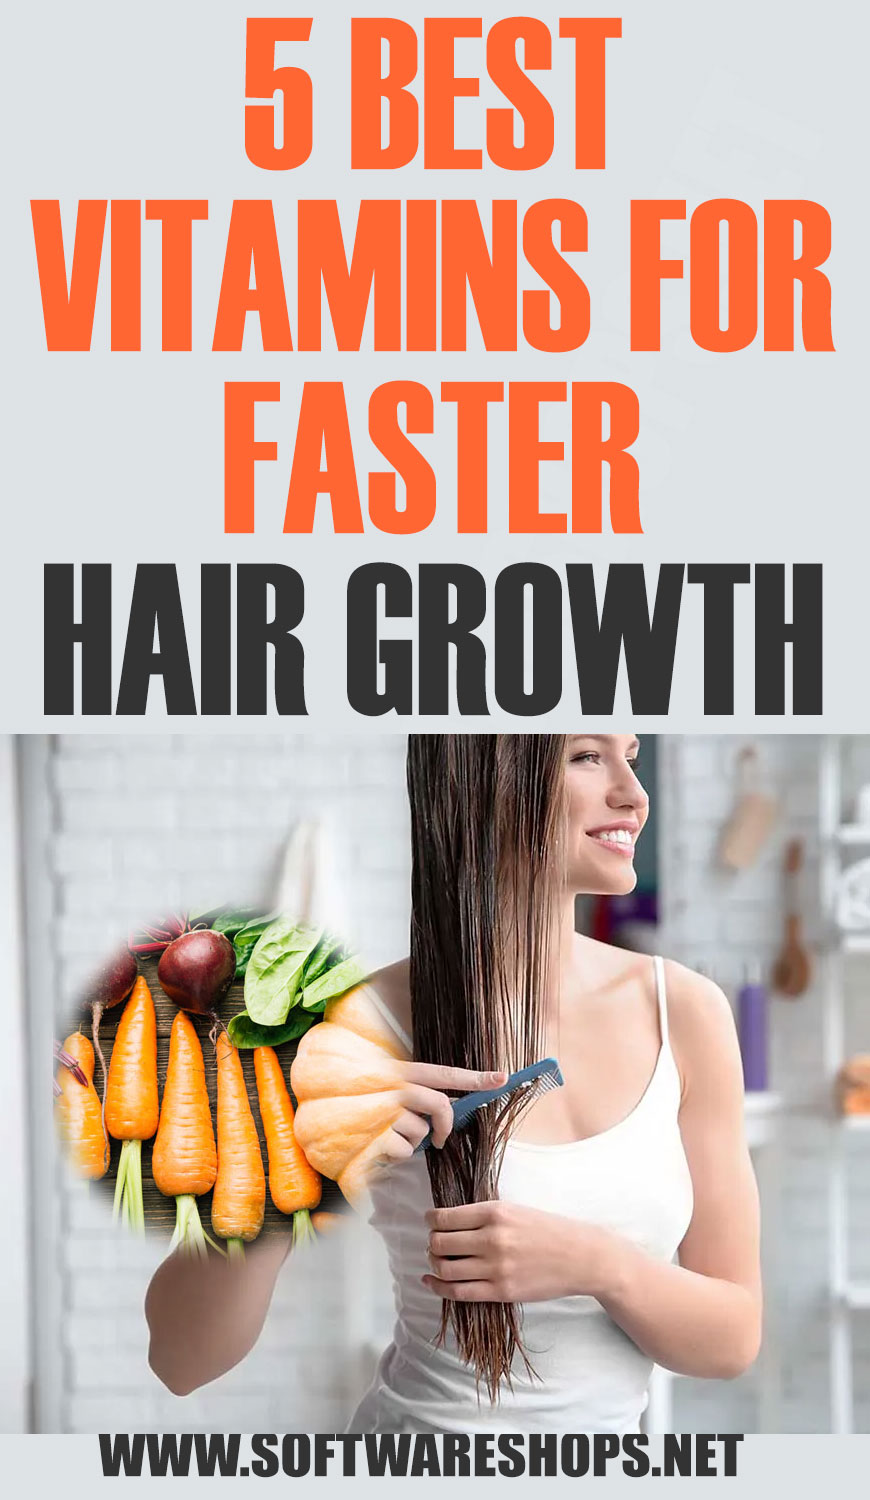 5 Best Vitamins for Faster Hair Growth